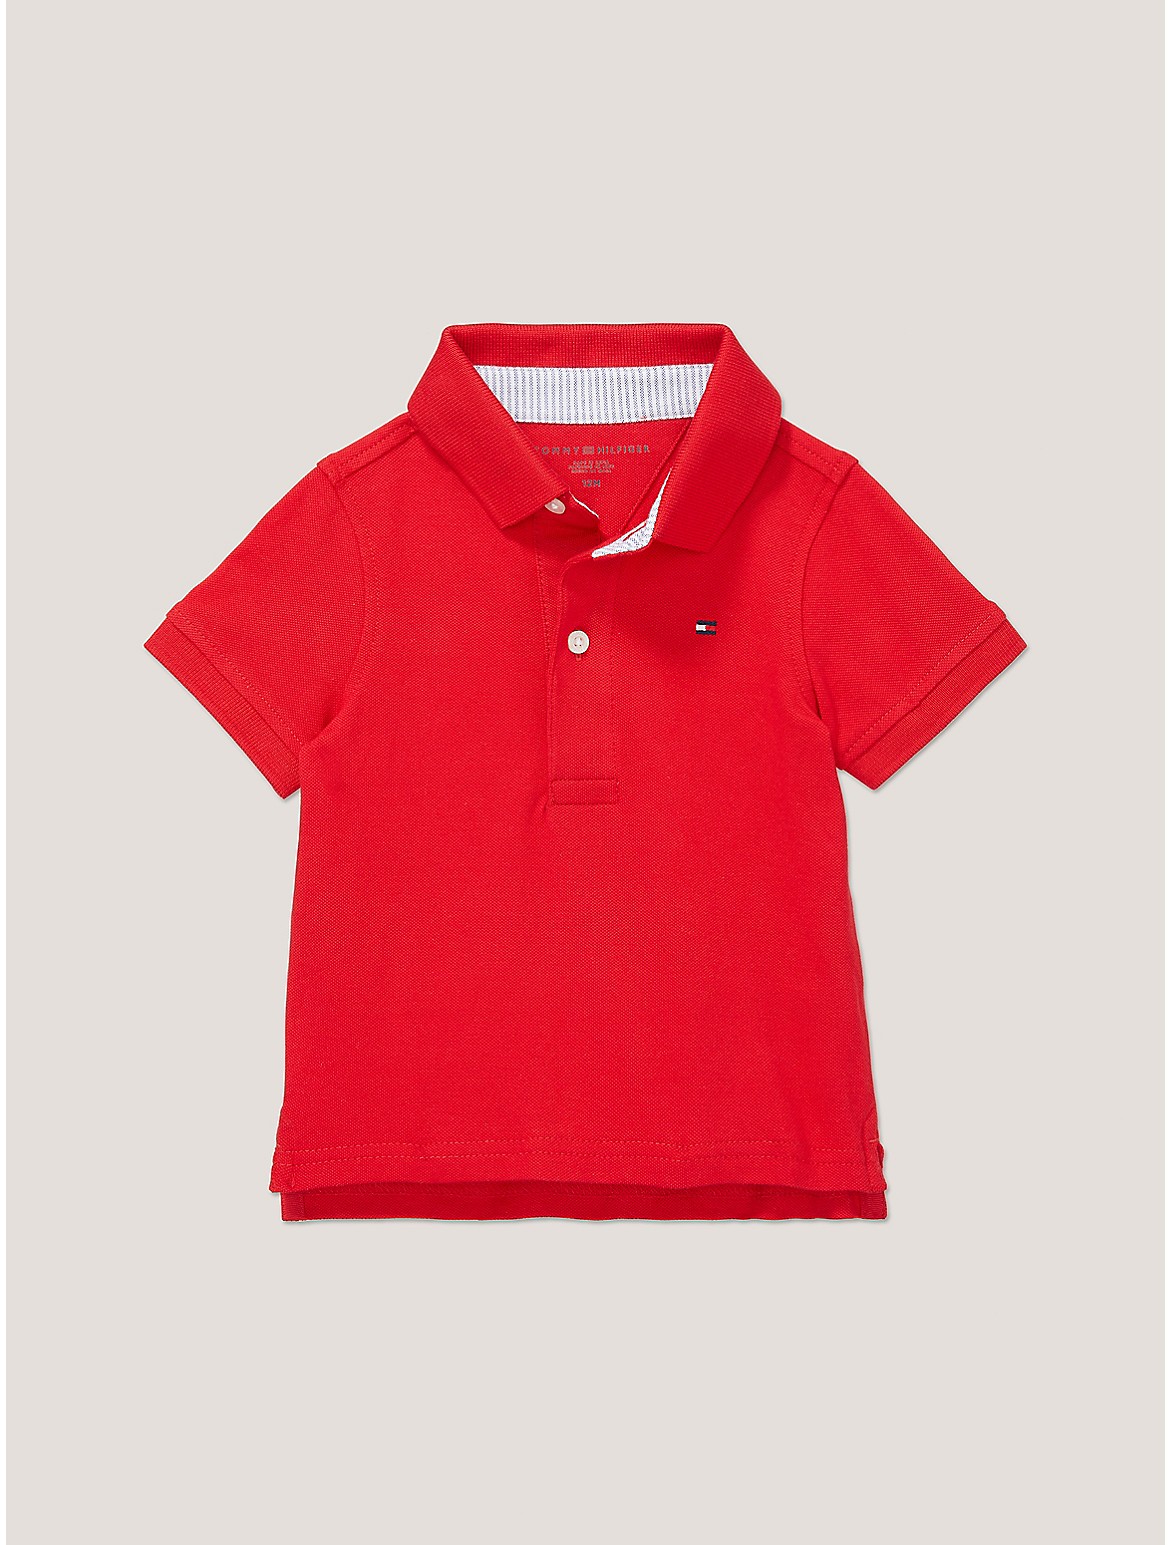 Tommy Hilfiger Boys' Babies' Solid Stretch Polo - Red - 12